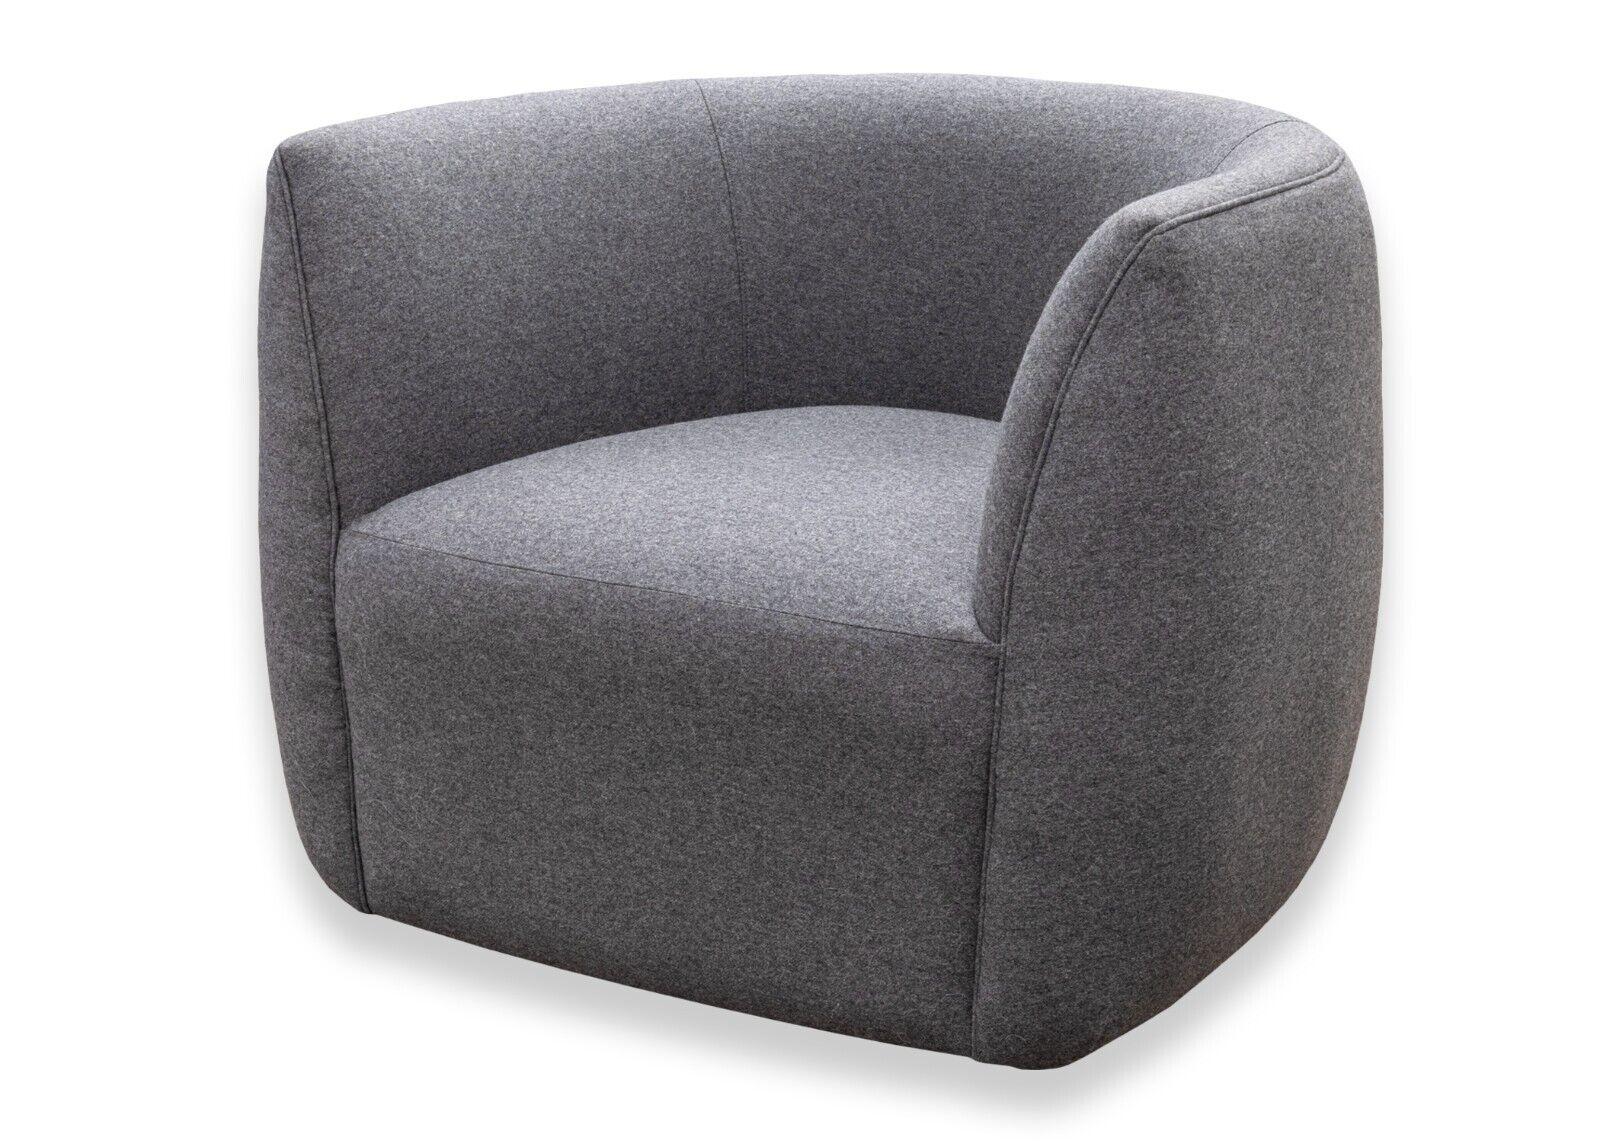 A Blu Dot Council contemporary modern swivel lounge chair in gabro grey. A gorgeous accent chair featuring a very chic, modern design. This wonderfully comfortable lounge chair features a soft wool blend upholstery, a wooden frame, and a bottom